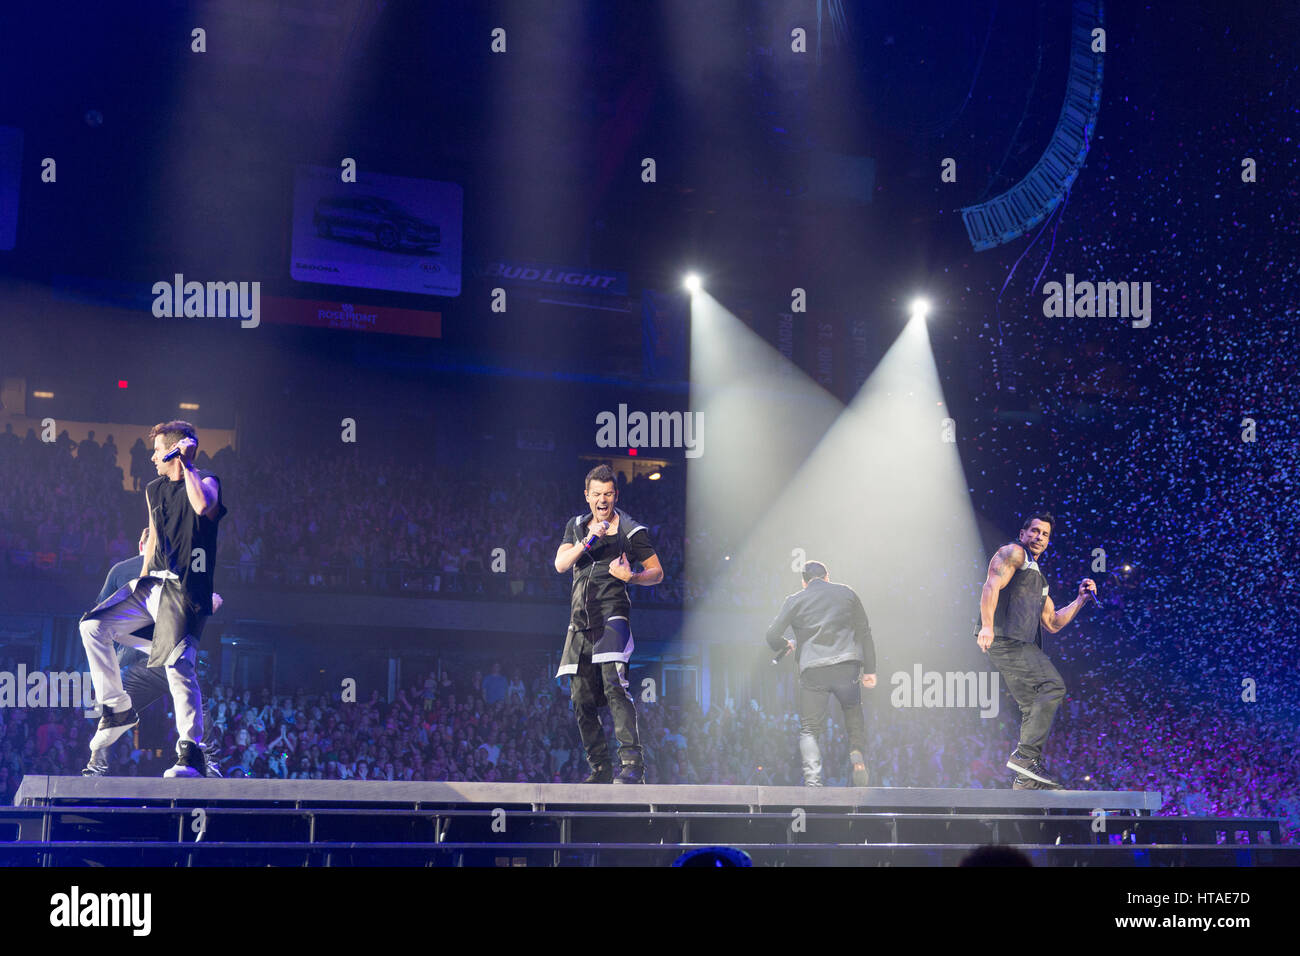 Rosemont, Illinois, USA. 23rd May, 2015. JOEY MCINTYRE, JORDAN KNIGHT, MARK WAHLBURG and DANNY WOOD of New Kids on the Block perform live on the NKOTB Main Event Tour at Allstate Arena in Rosemont, Illinois Credit: Daniel DeSlover/ZUMA Wire/Alamy Live News Stock Photo